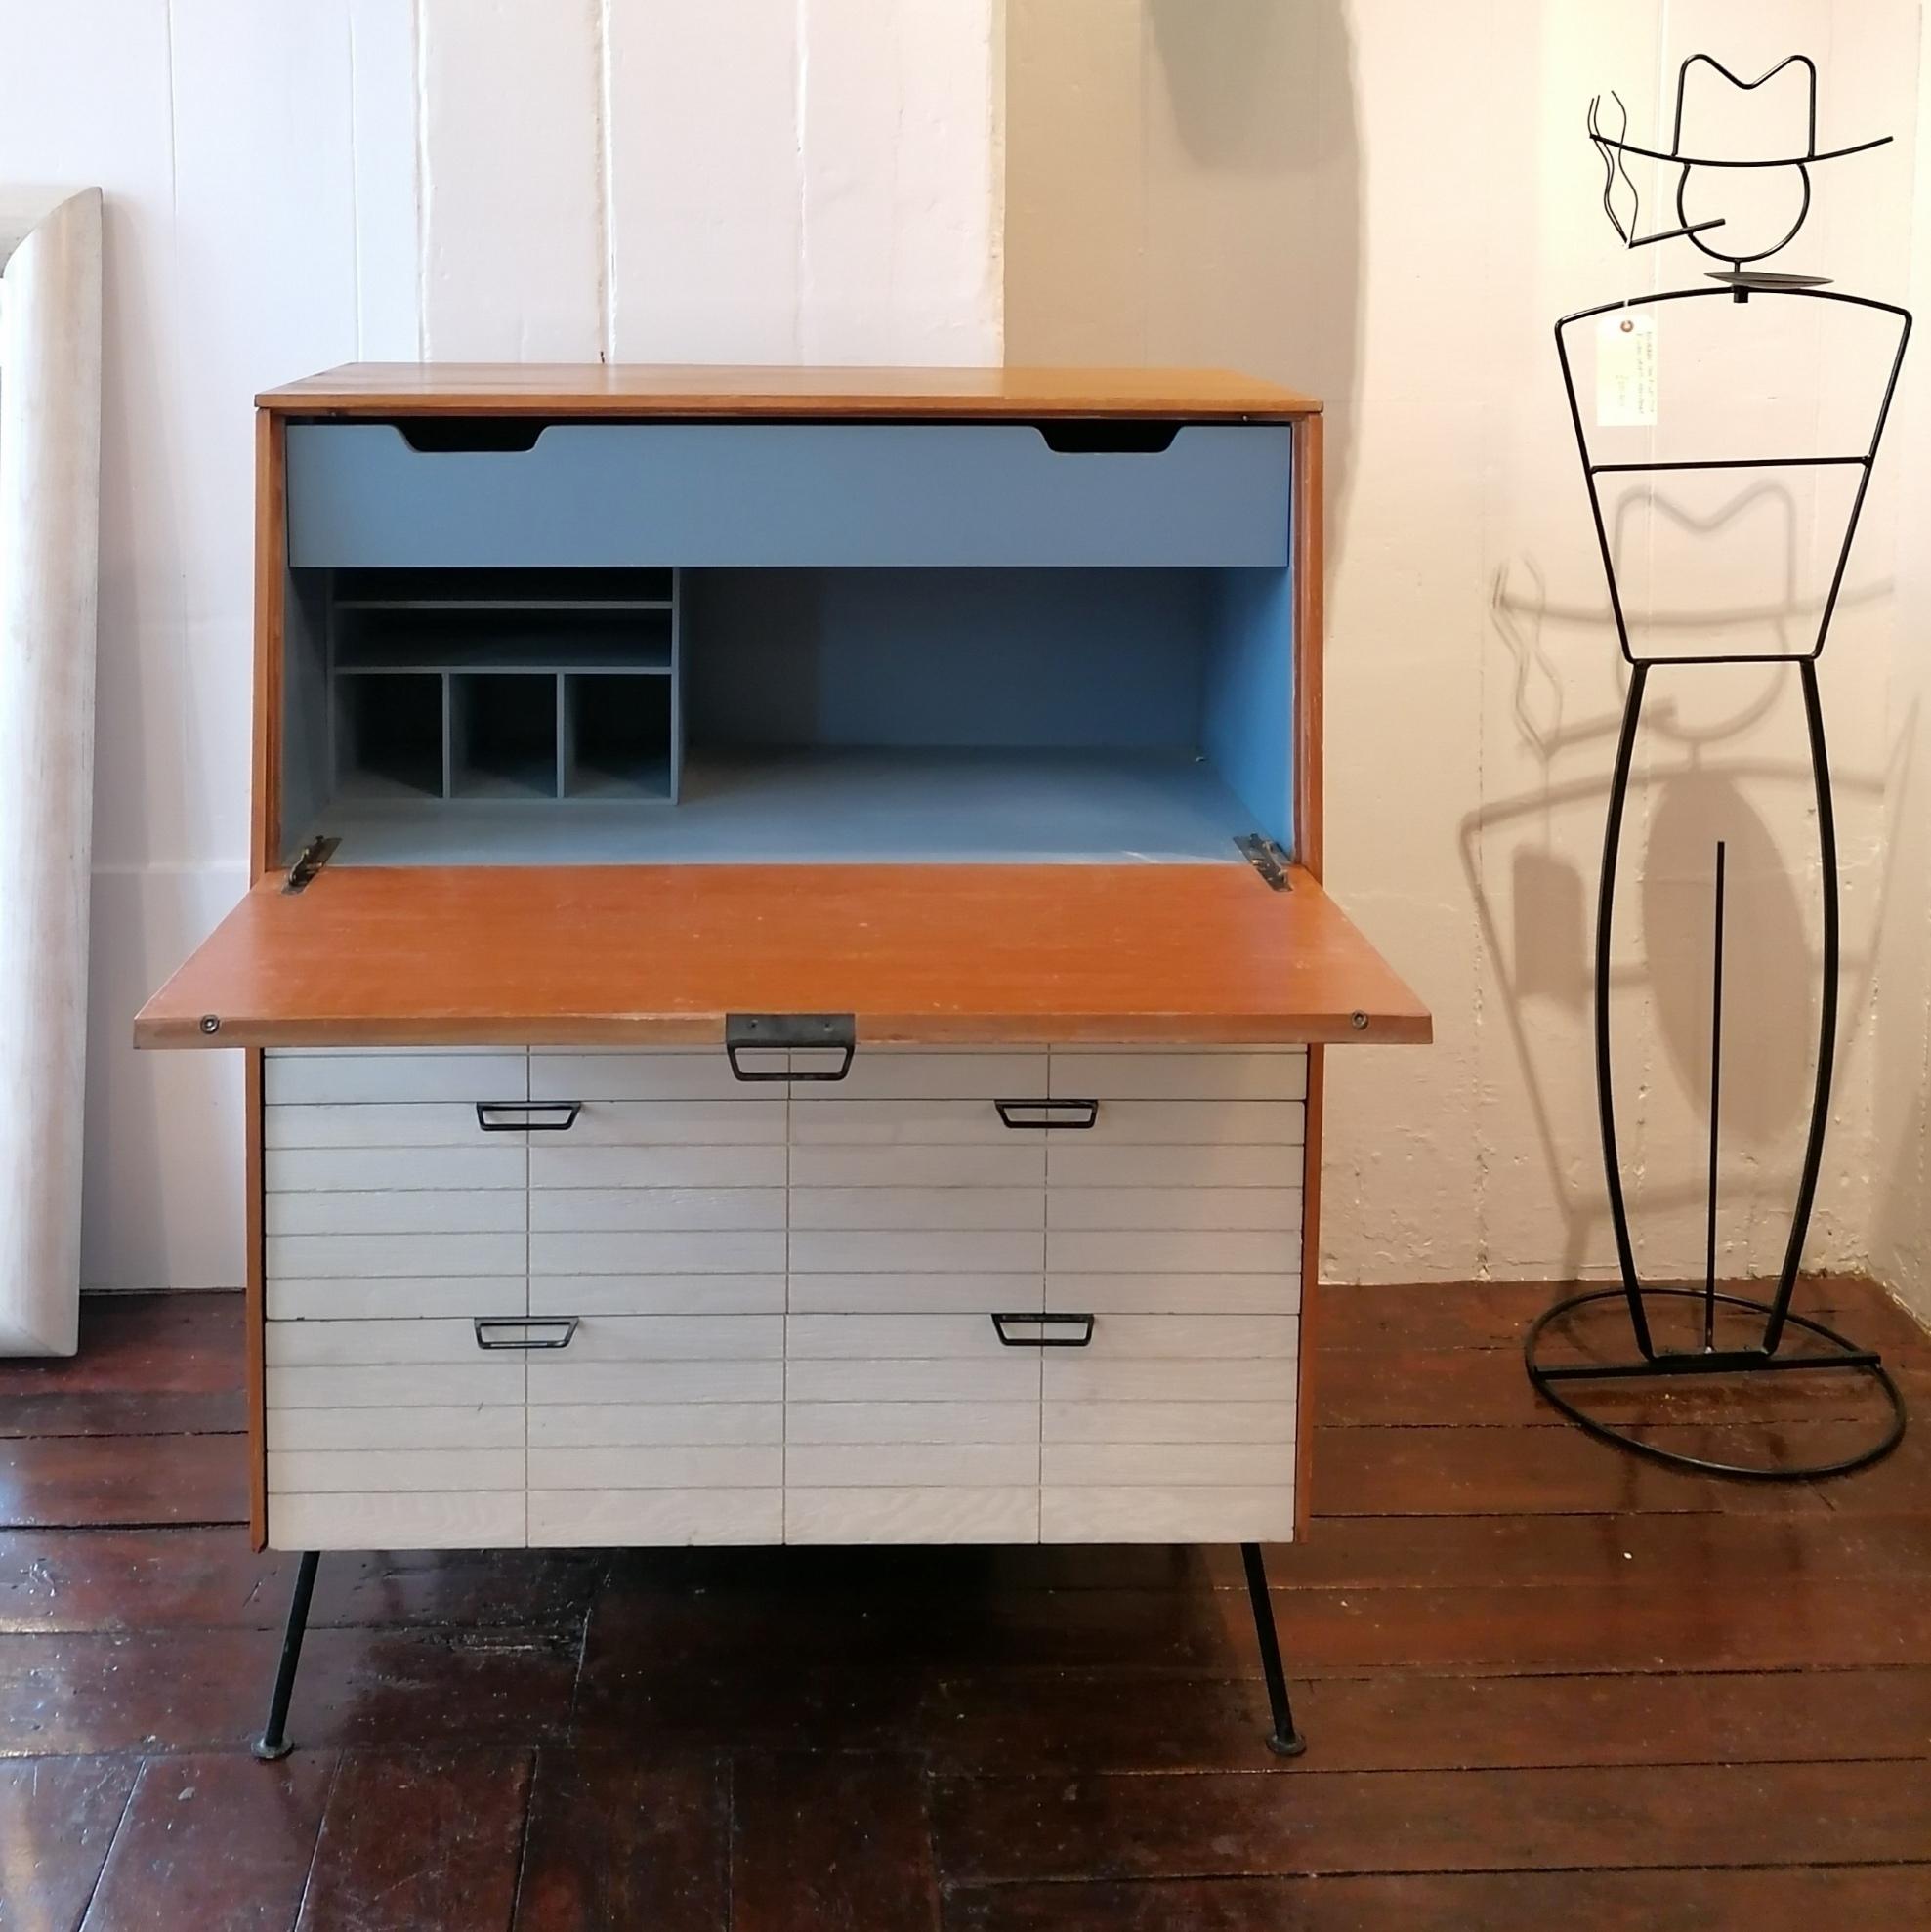 Rare Raymond Loewy for Mengel Furniture desk / cabinet with drop-down front, USA 1950s.
Oak veneer body, cerused oak drawers with incised geometric lines. Stands on angled black iron legs with circular feet. Desk interior in original blue